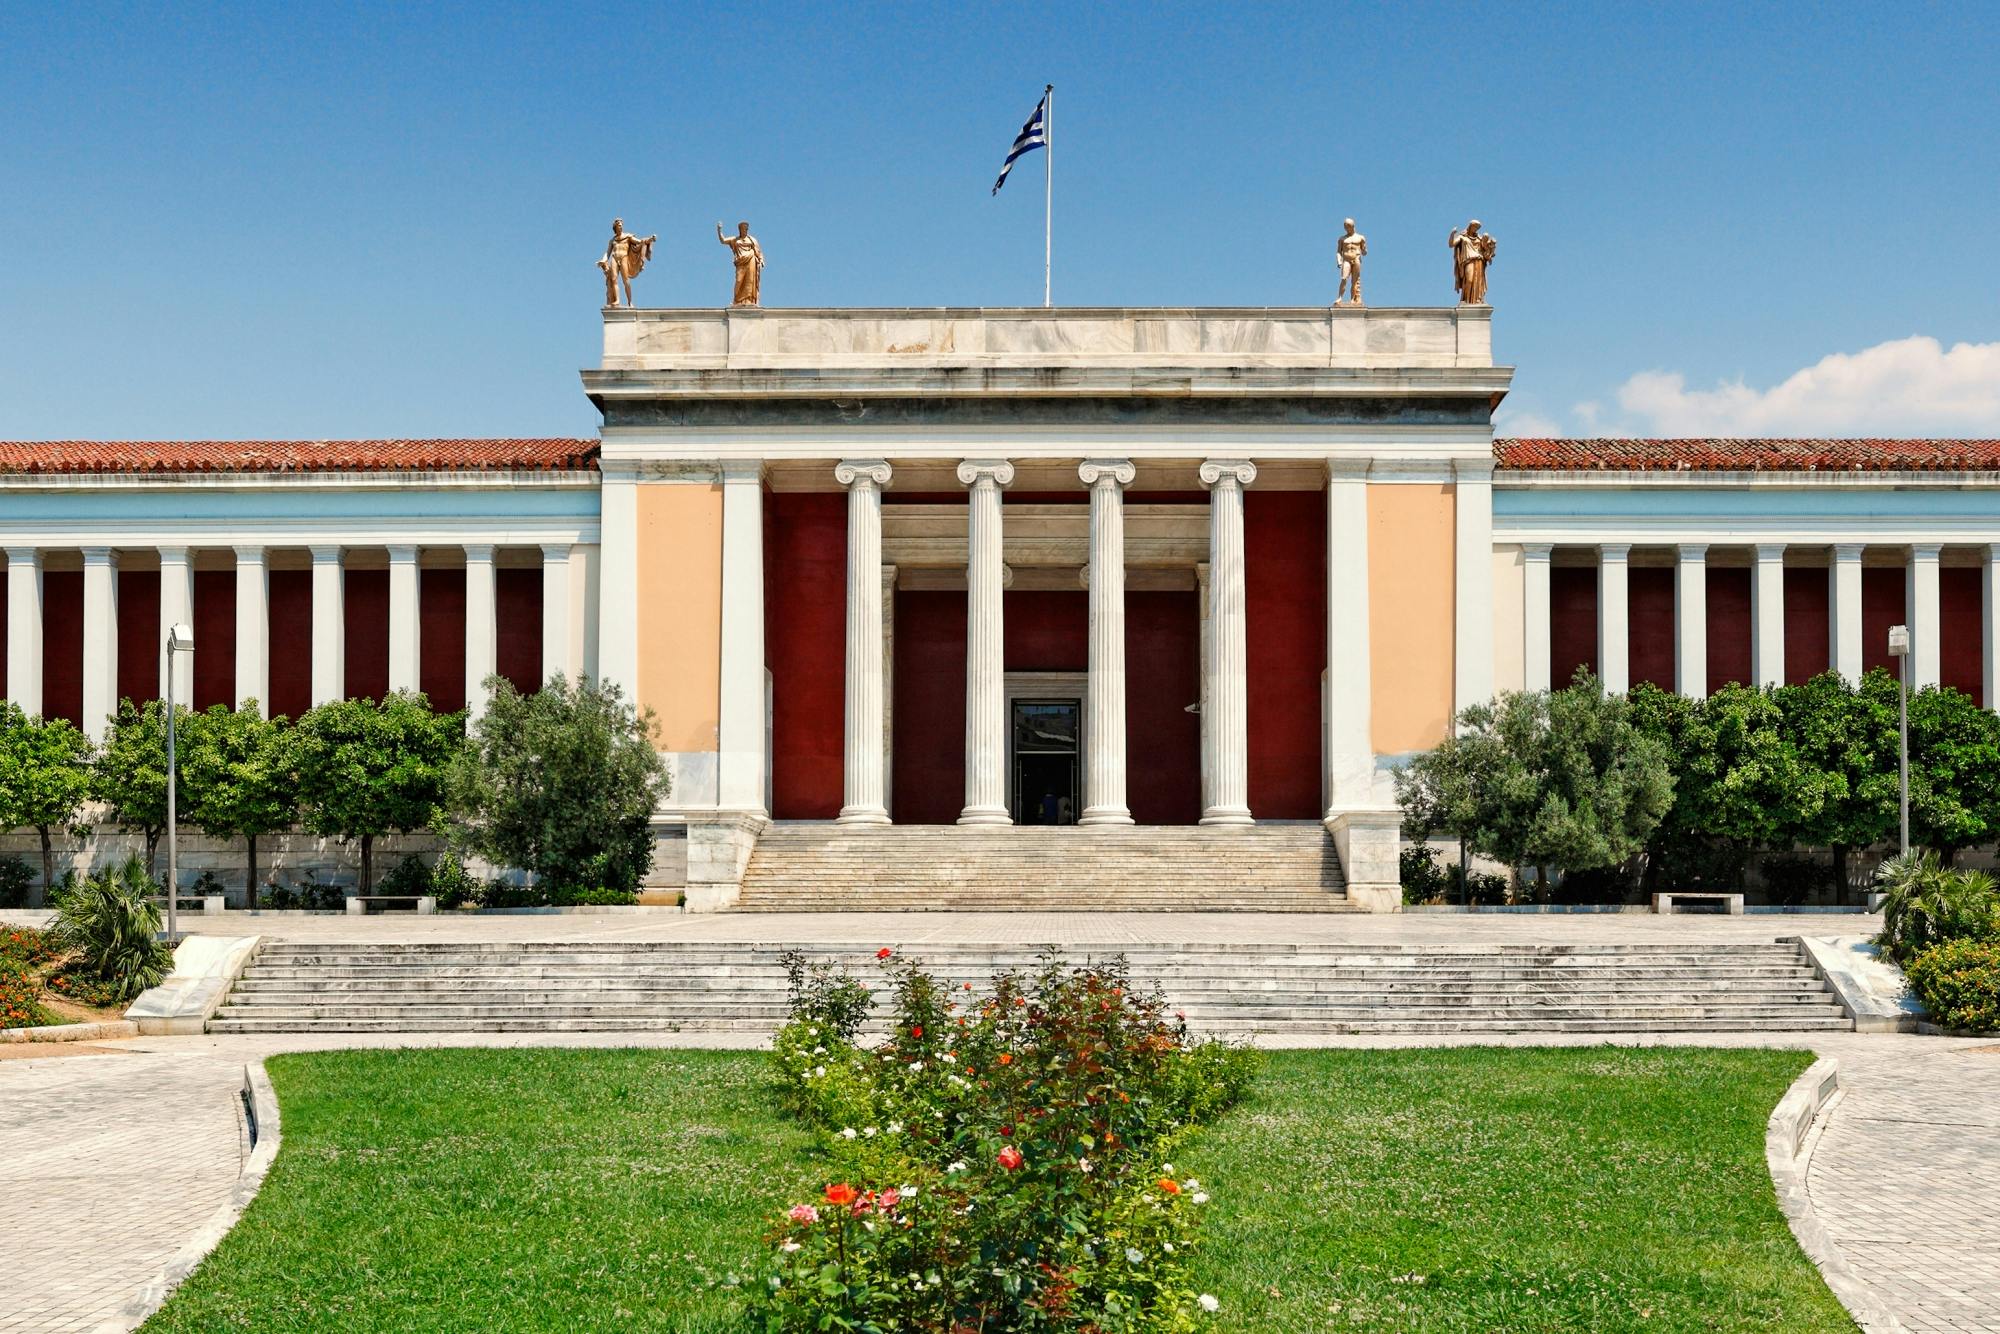 Athens Archeological Museum